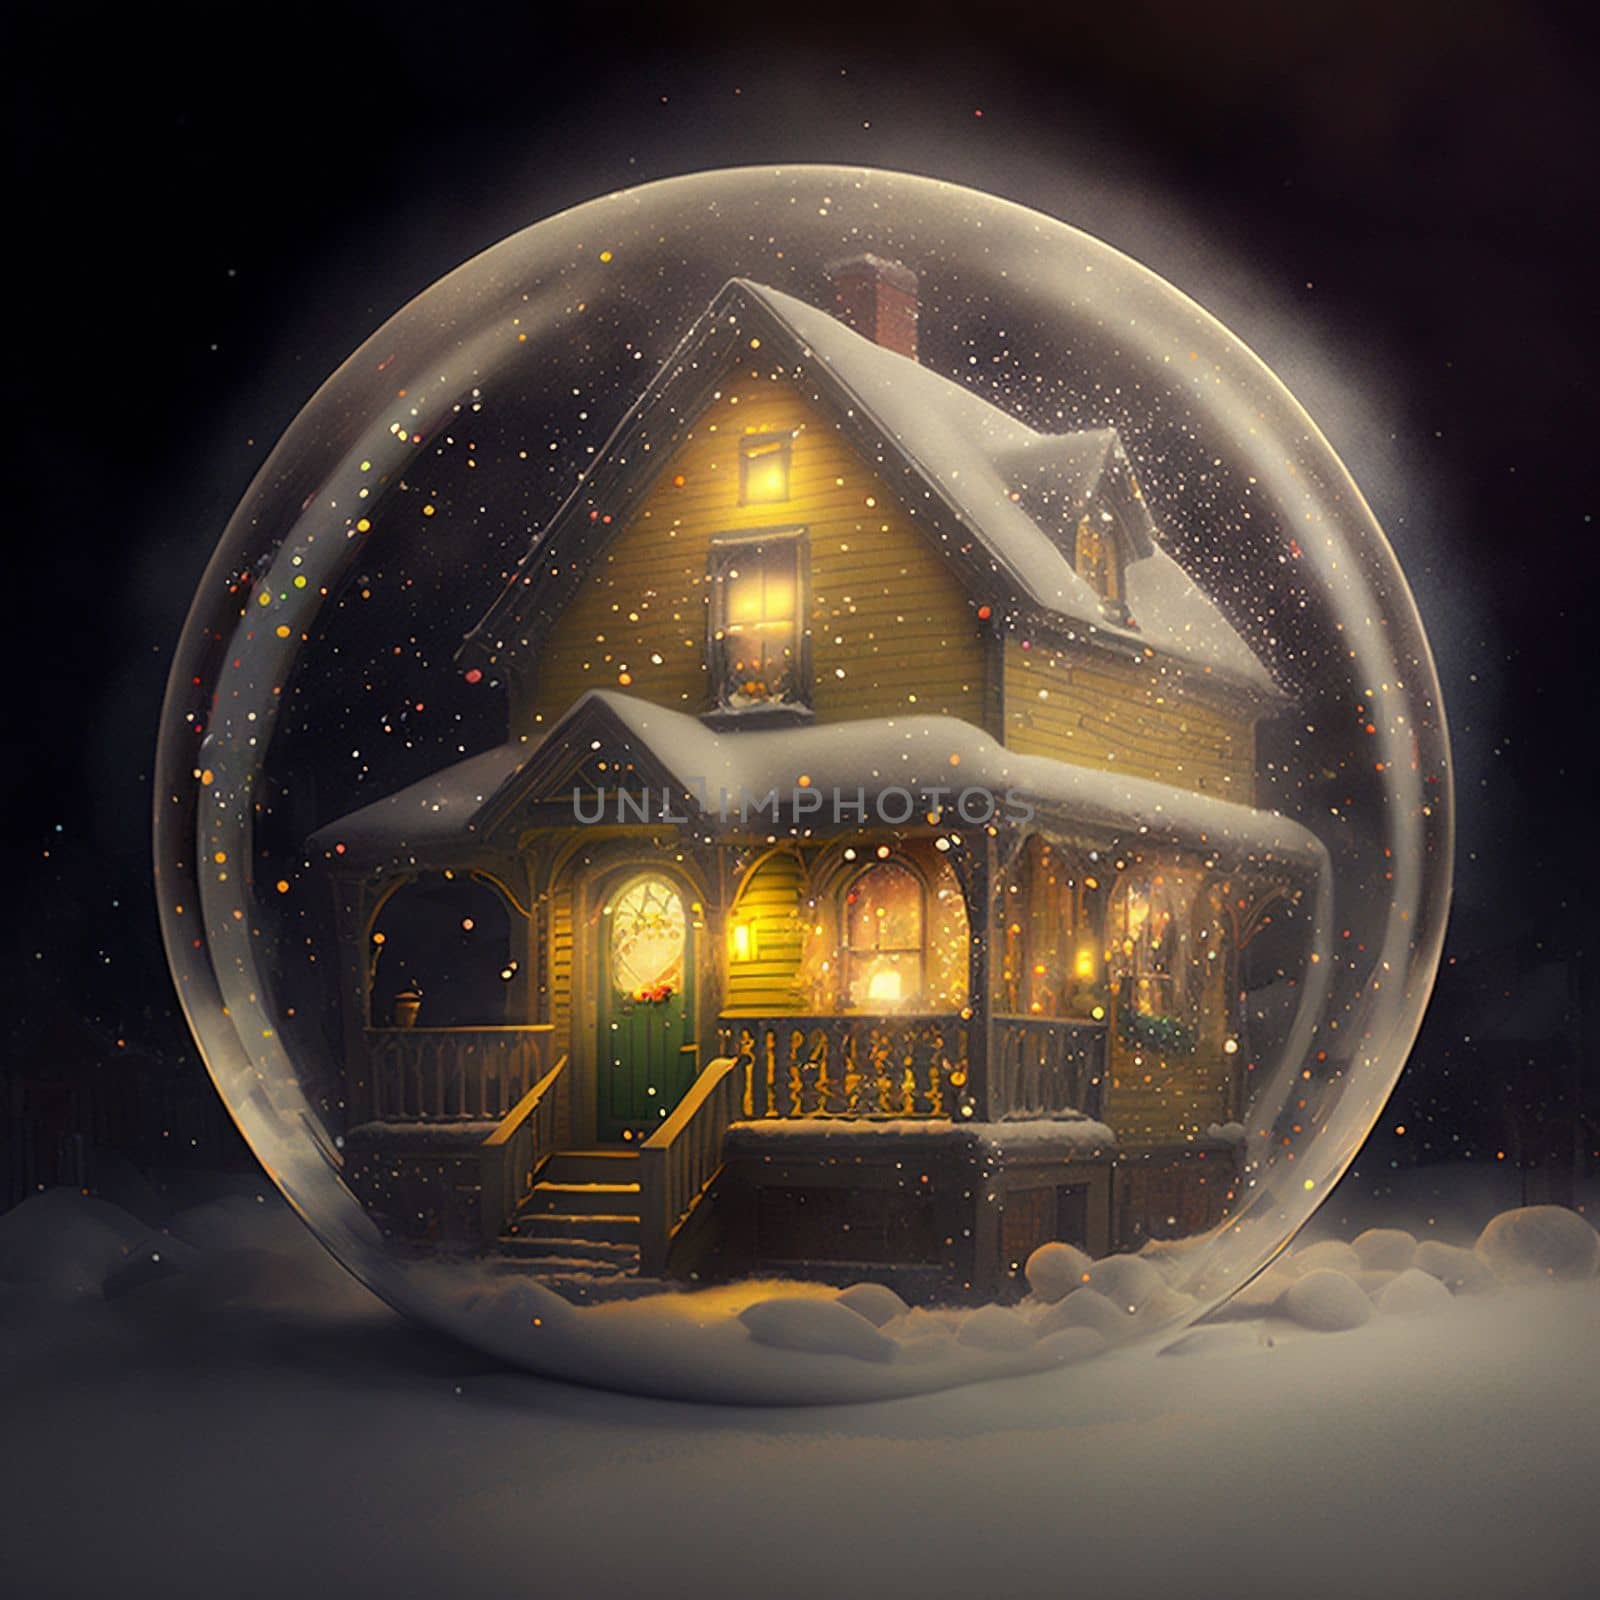 a small house with glowing windows in a glass ball, a New Year's exposition, a toy by NeuroSky